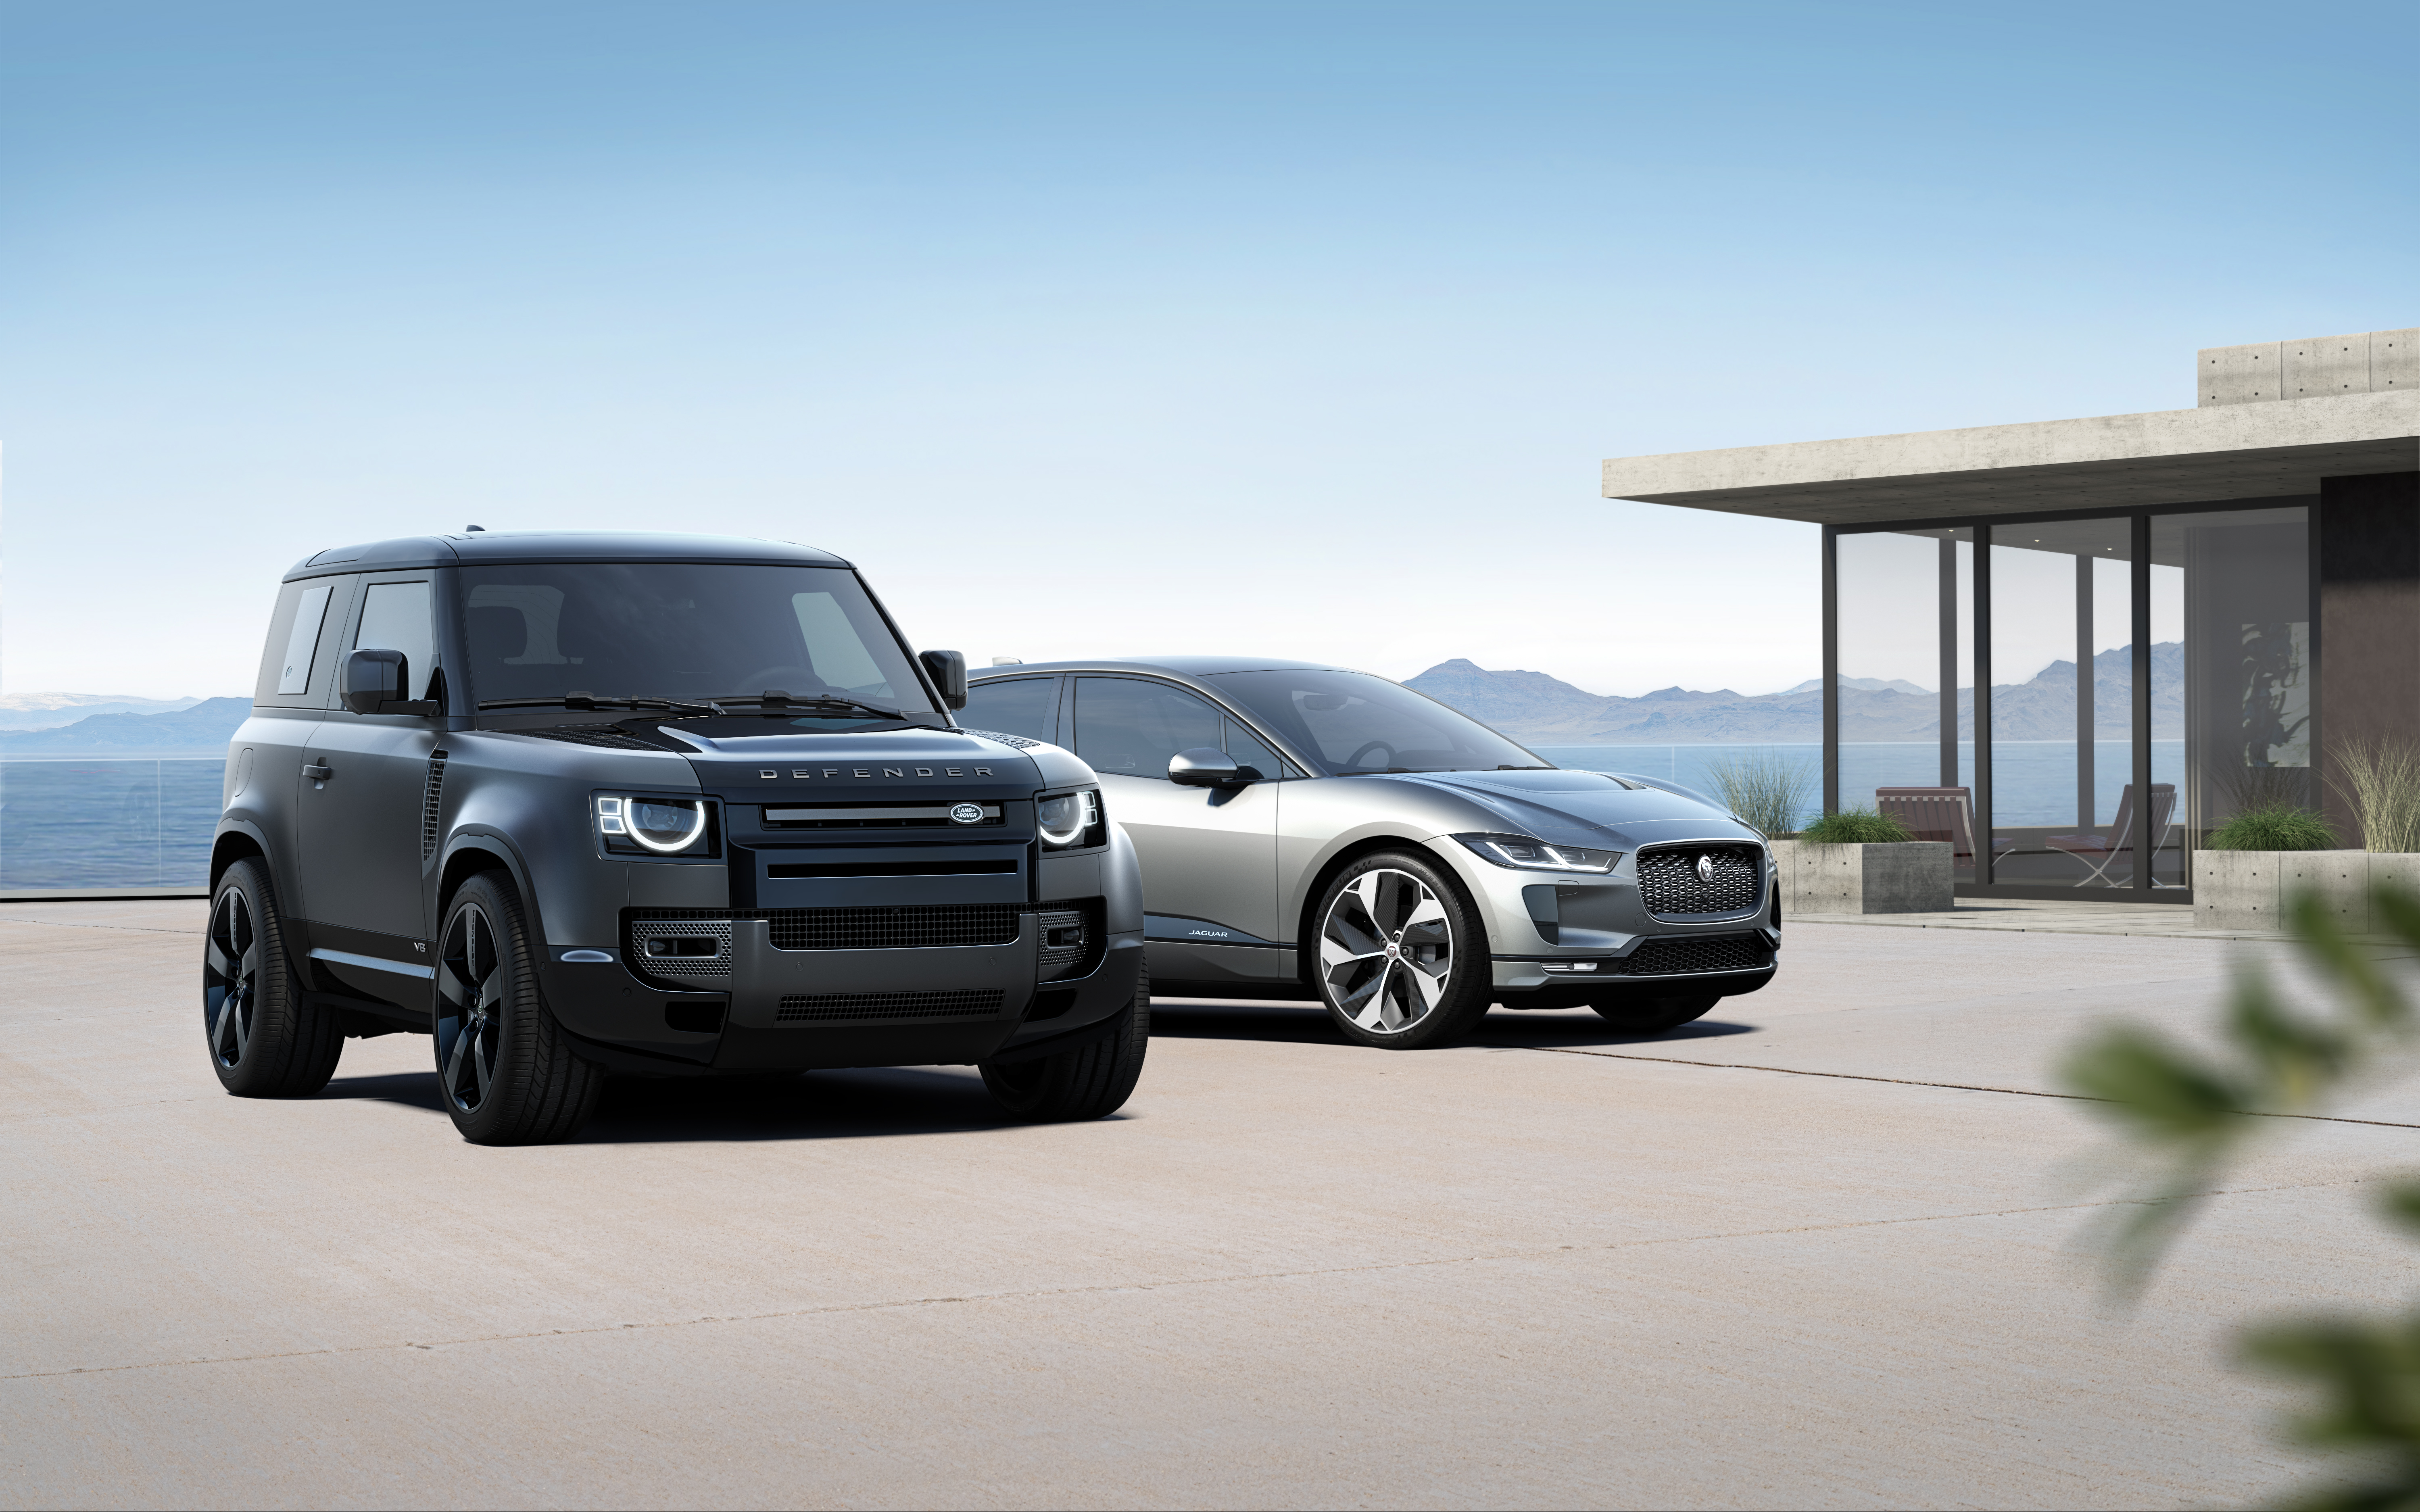 Jaguar land rover will reimagine the future of modern luxury by design through its two distinct, british brands. Second Quarter Sales Constrained By Semiconductor Supply In Line With Guidance Jlr Media Newsroom